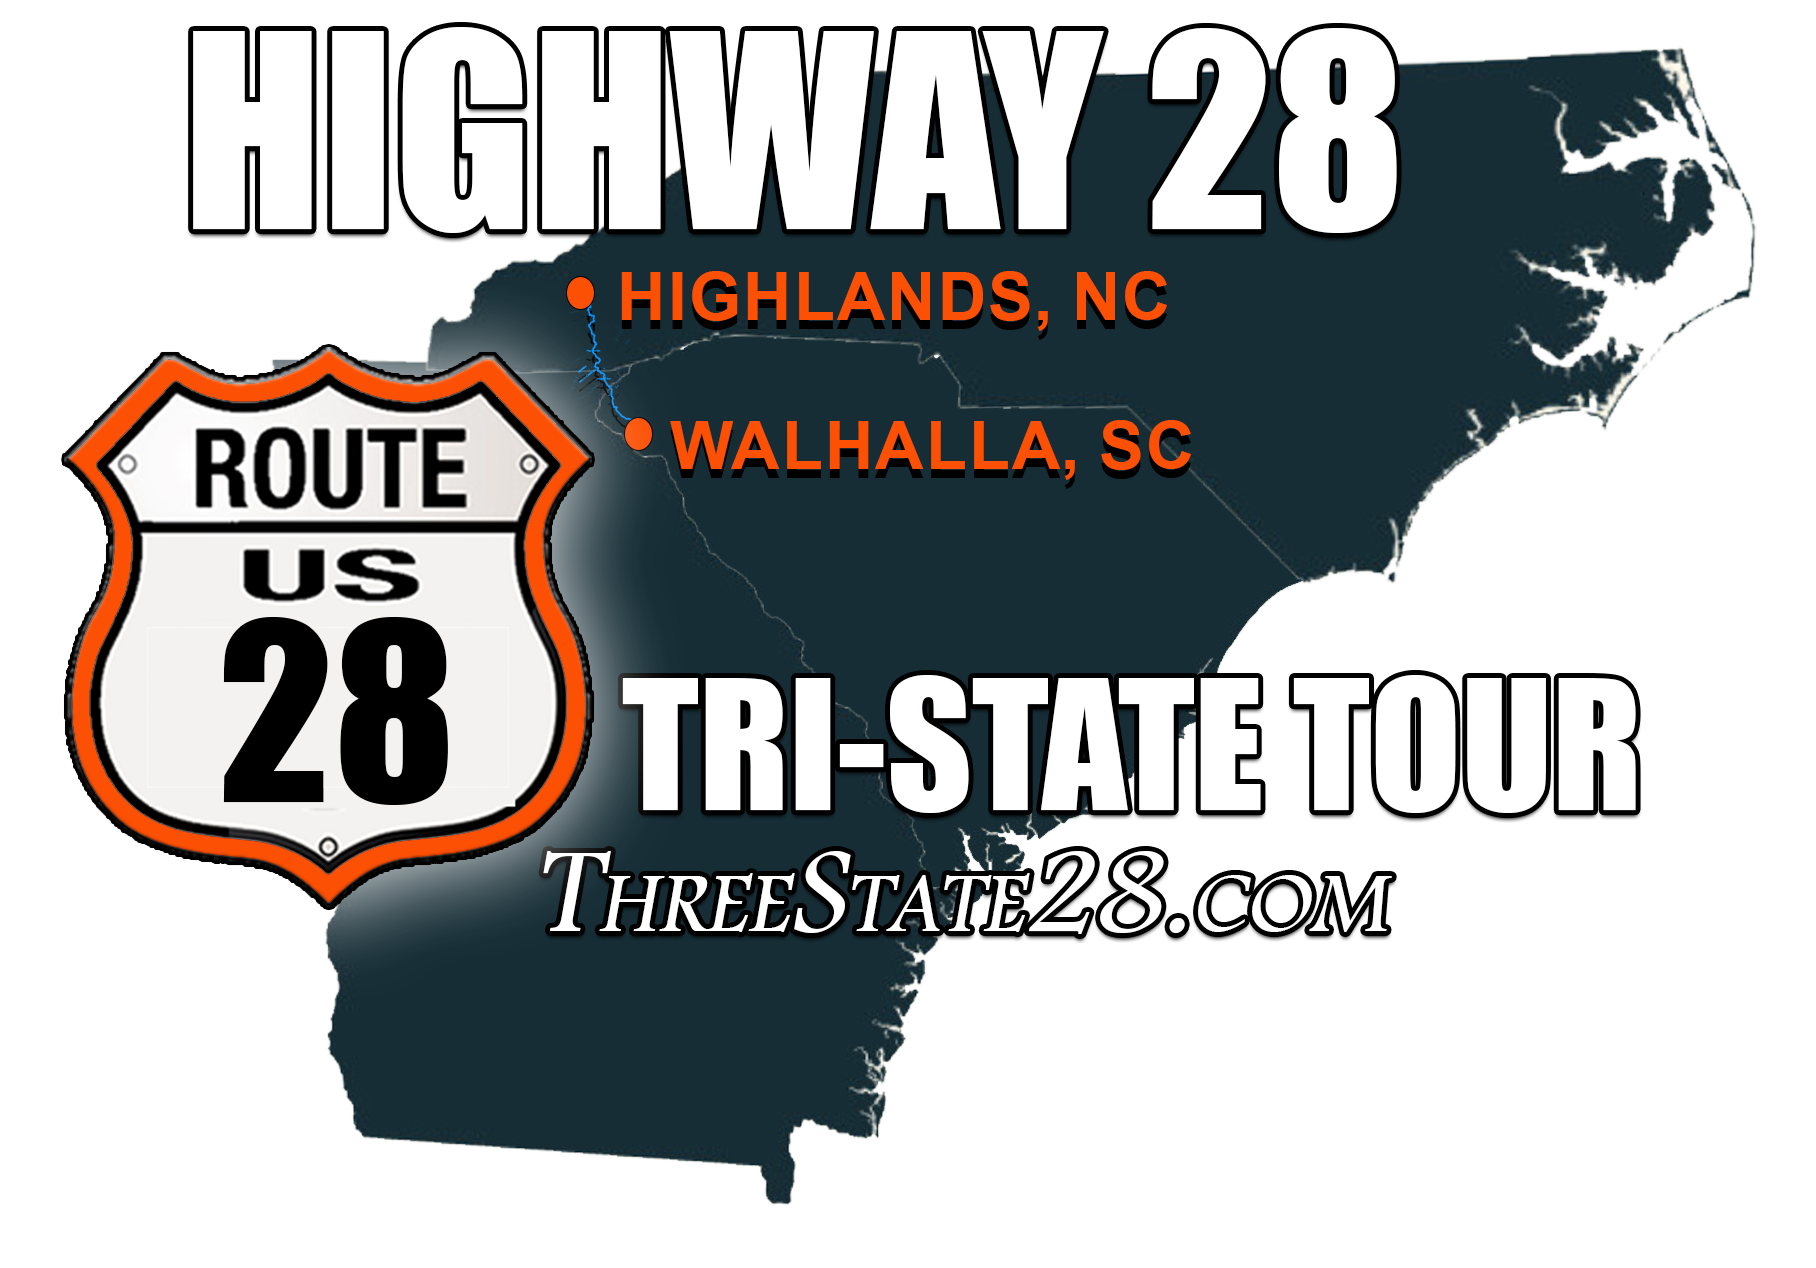 The ThreeState28.com motorcycle ride starts in Walhalla, SC and heads north on Highway 28 for 32 miles. 